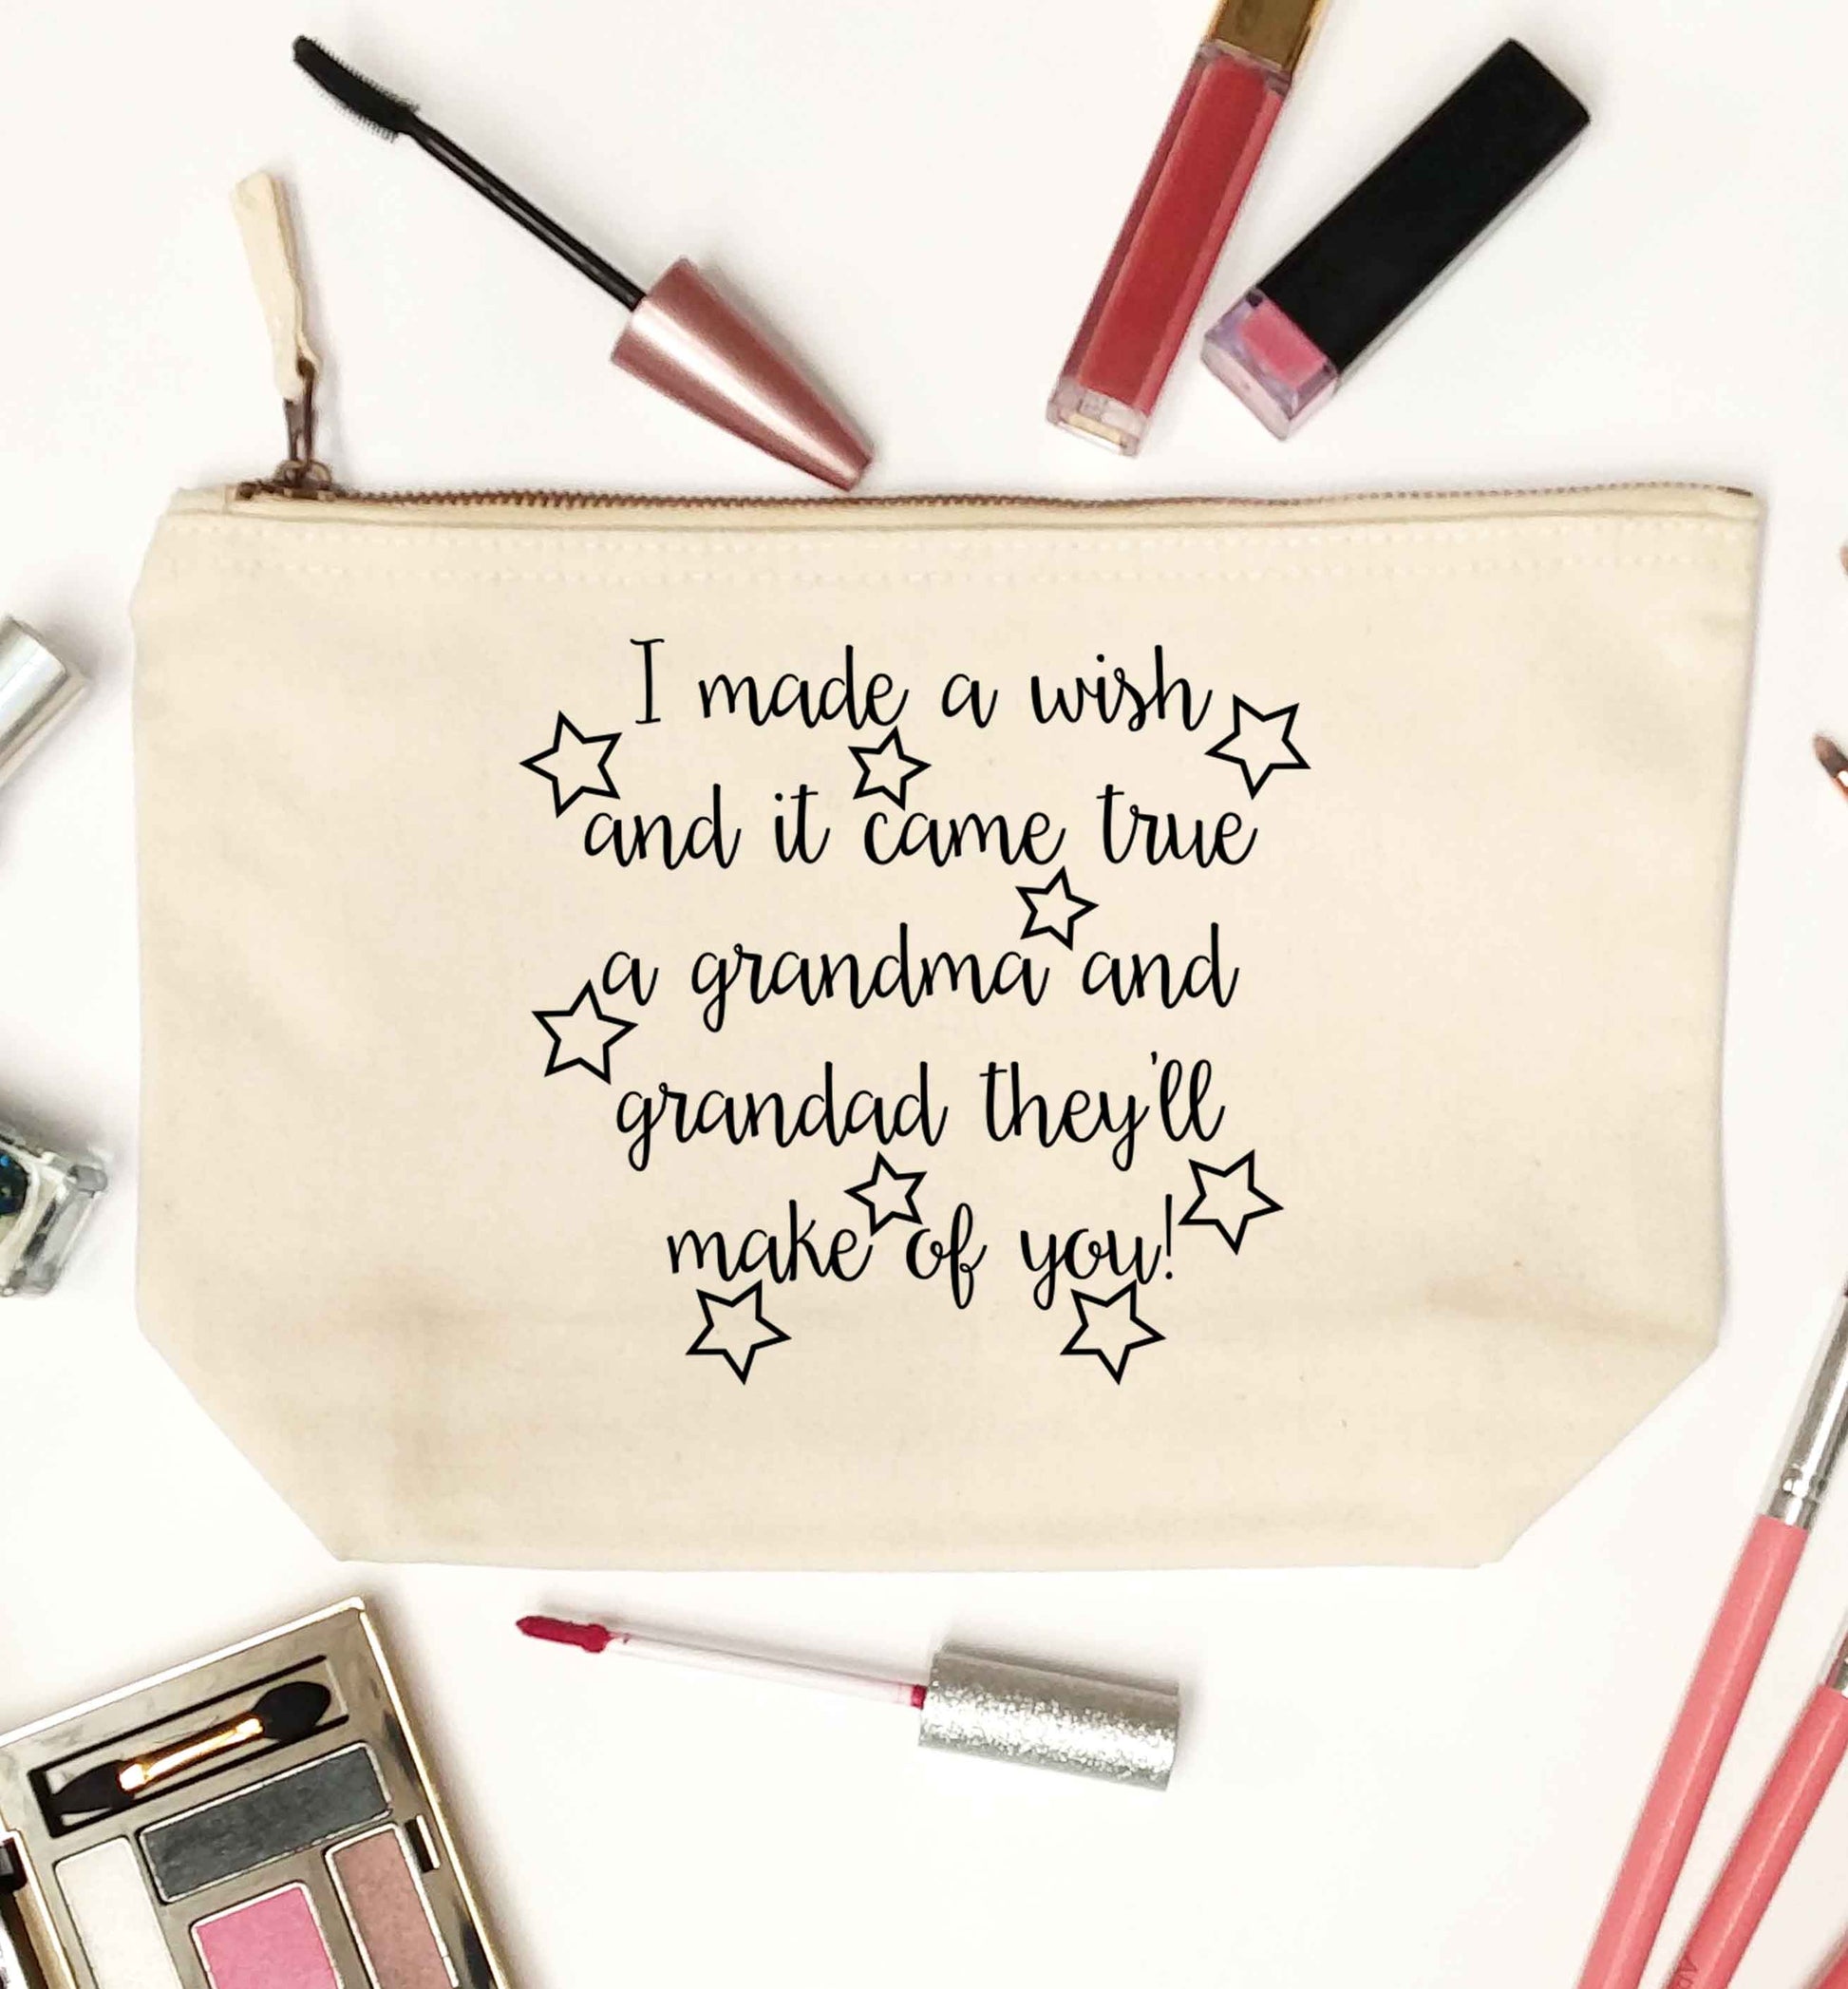 I made a wish and it came true a grandma and grandad they'll make of you! natural makeup bag